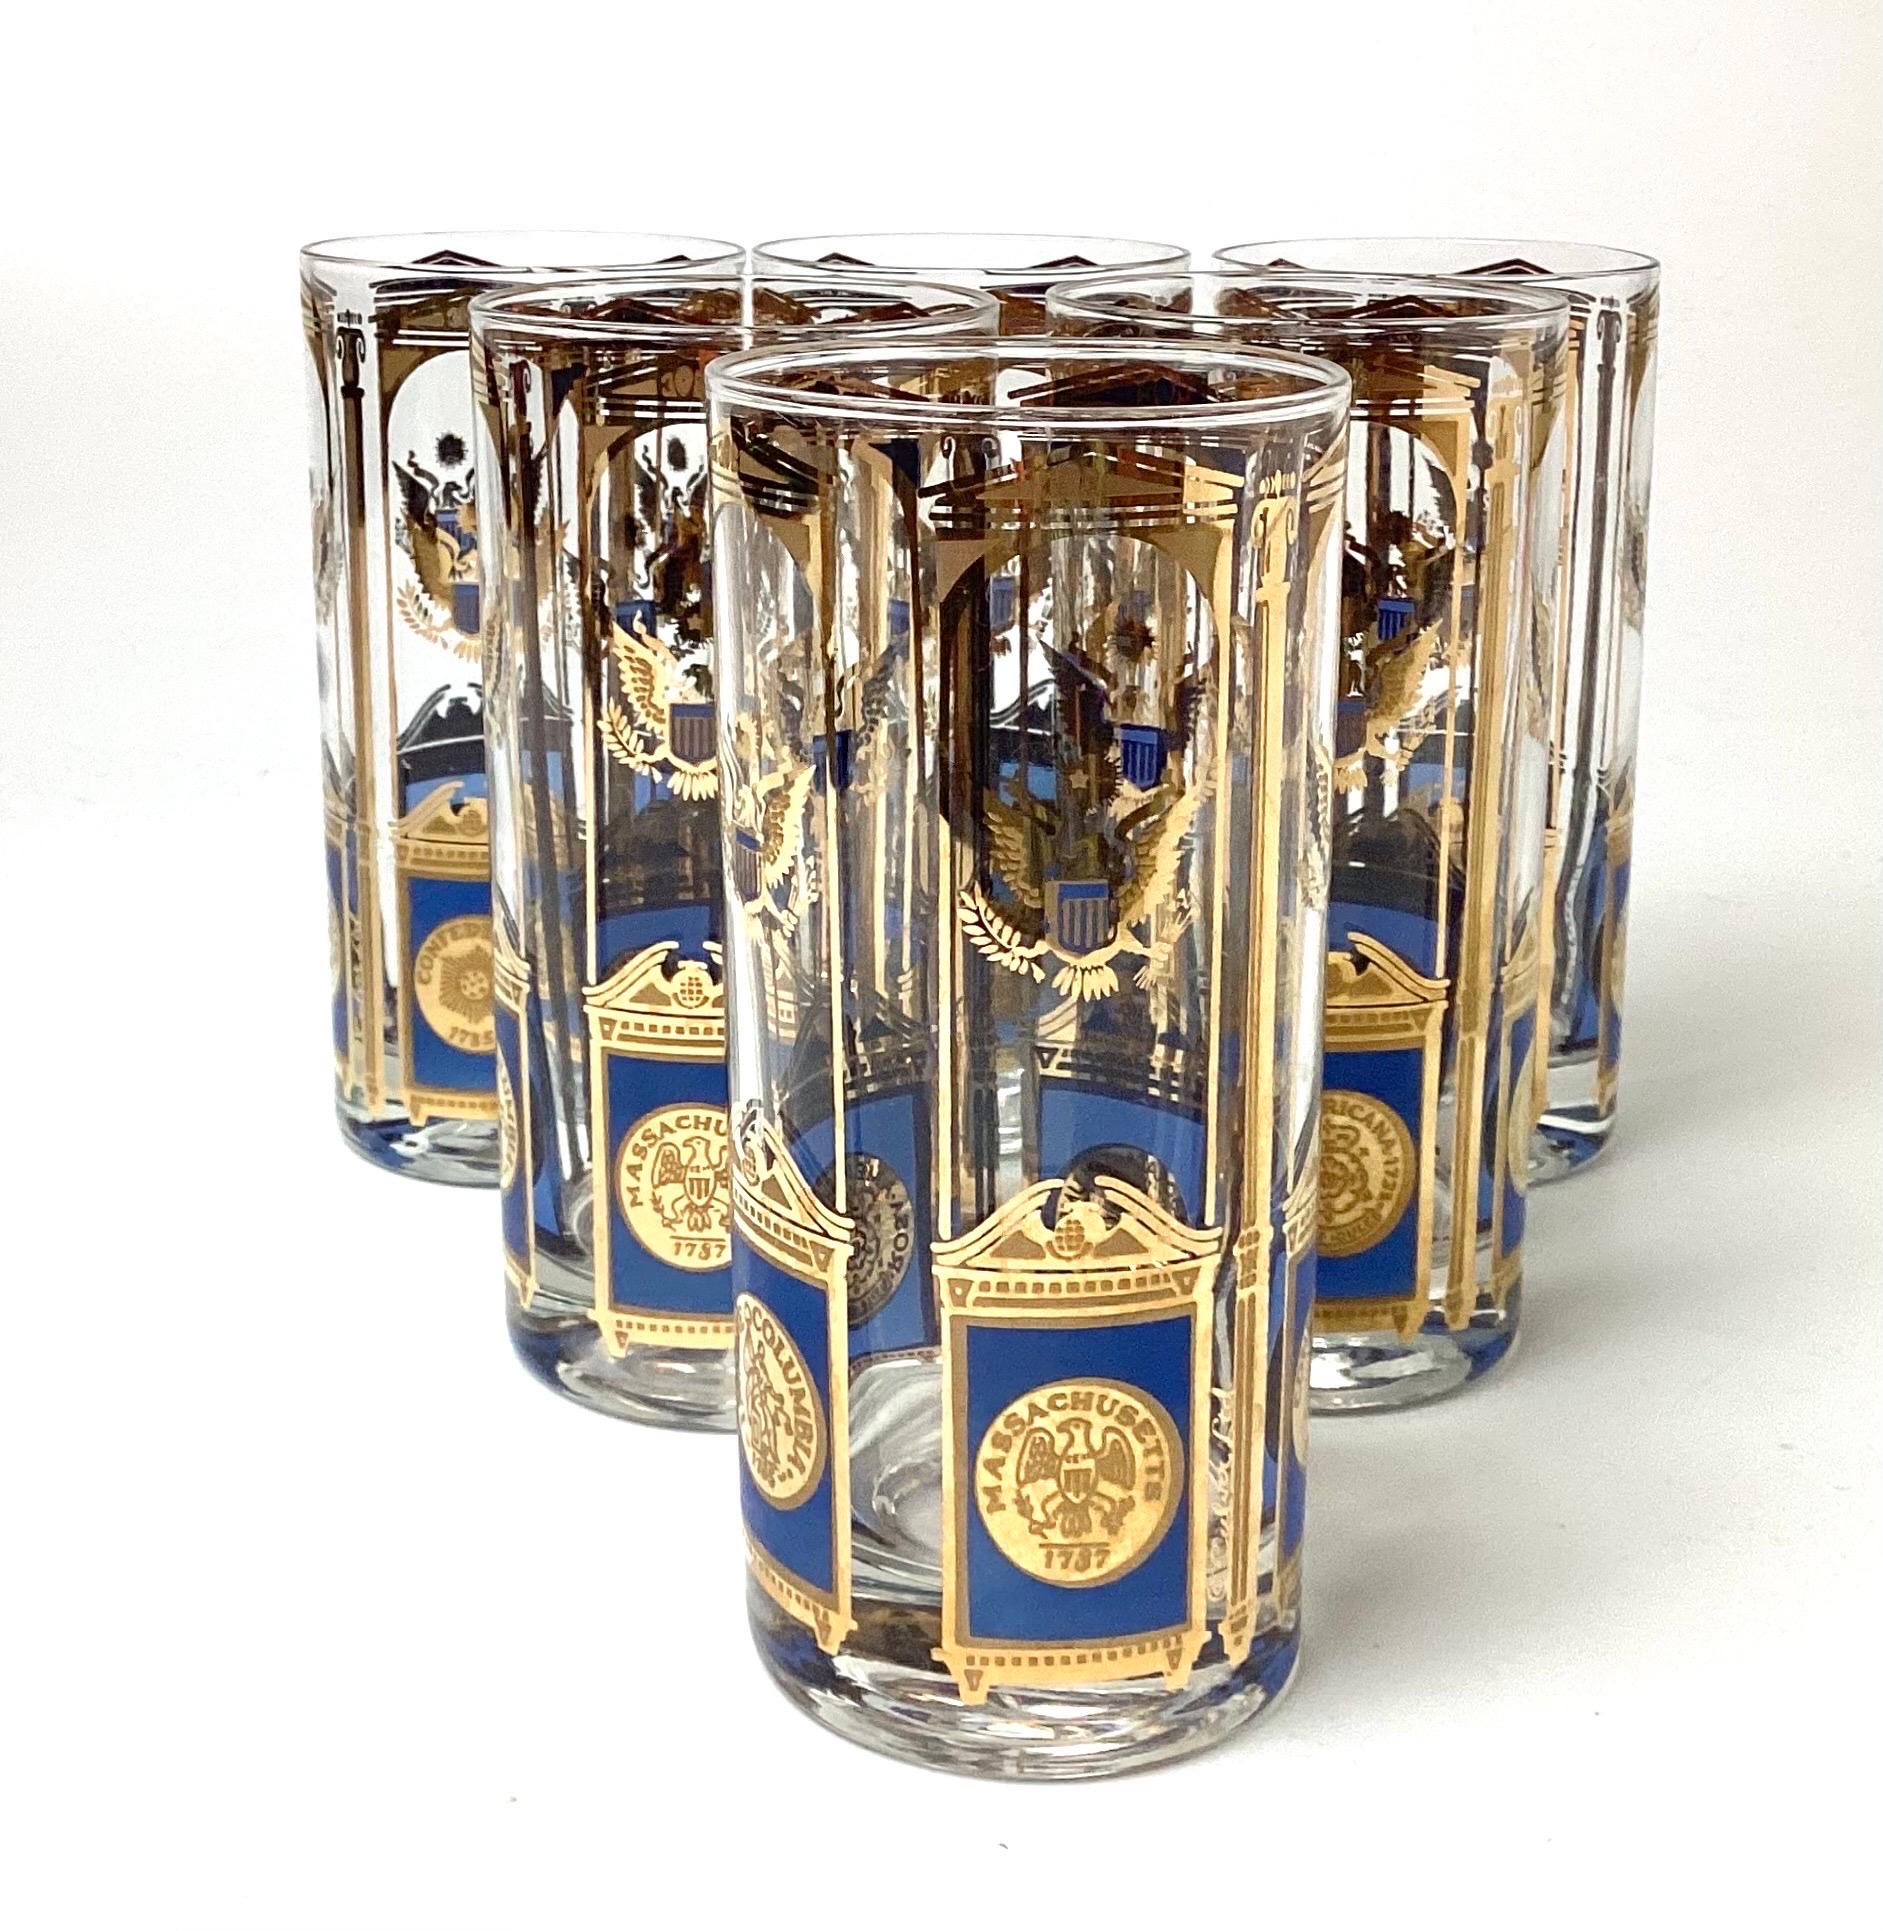 Midcentury Presidential Culver LTD Highball Glasses set of 6 In Excellent Condition For Sale In Lambertville, NJ